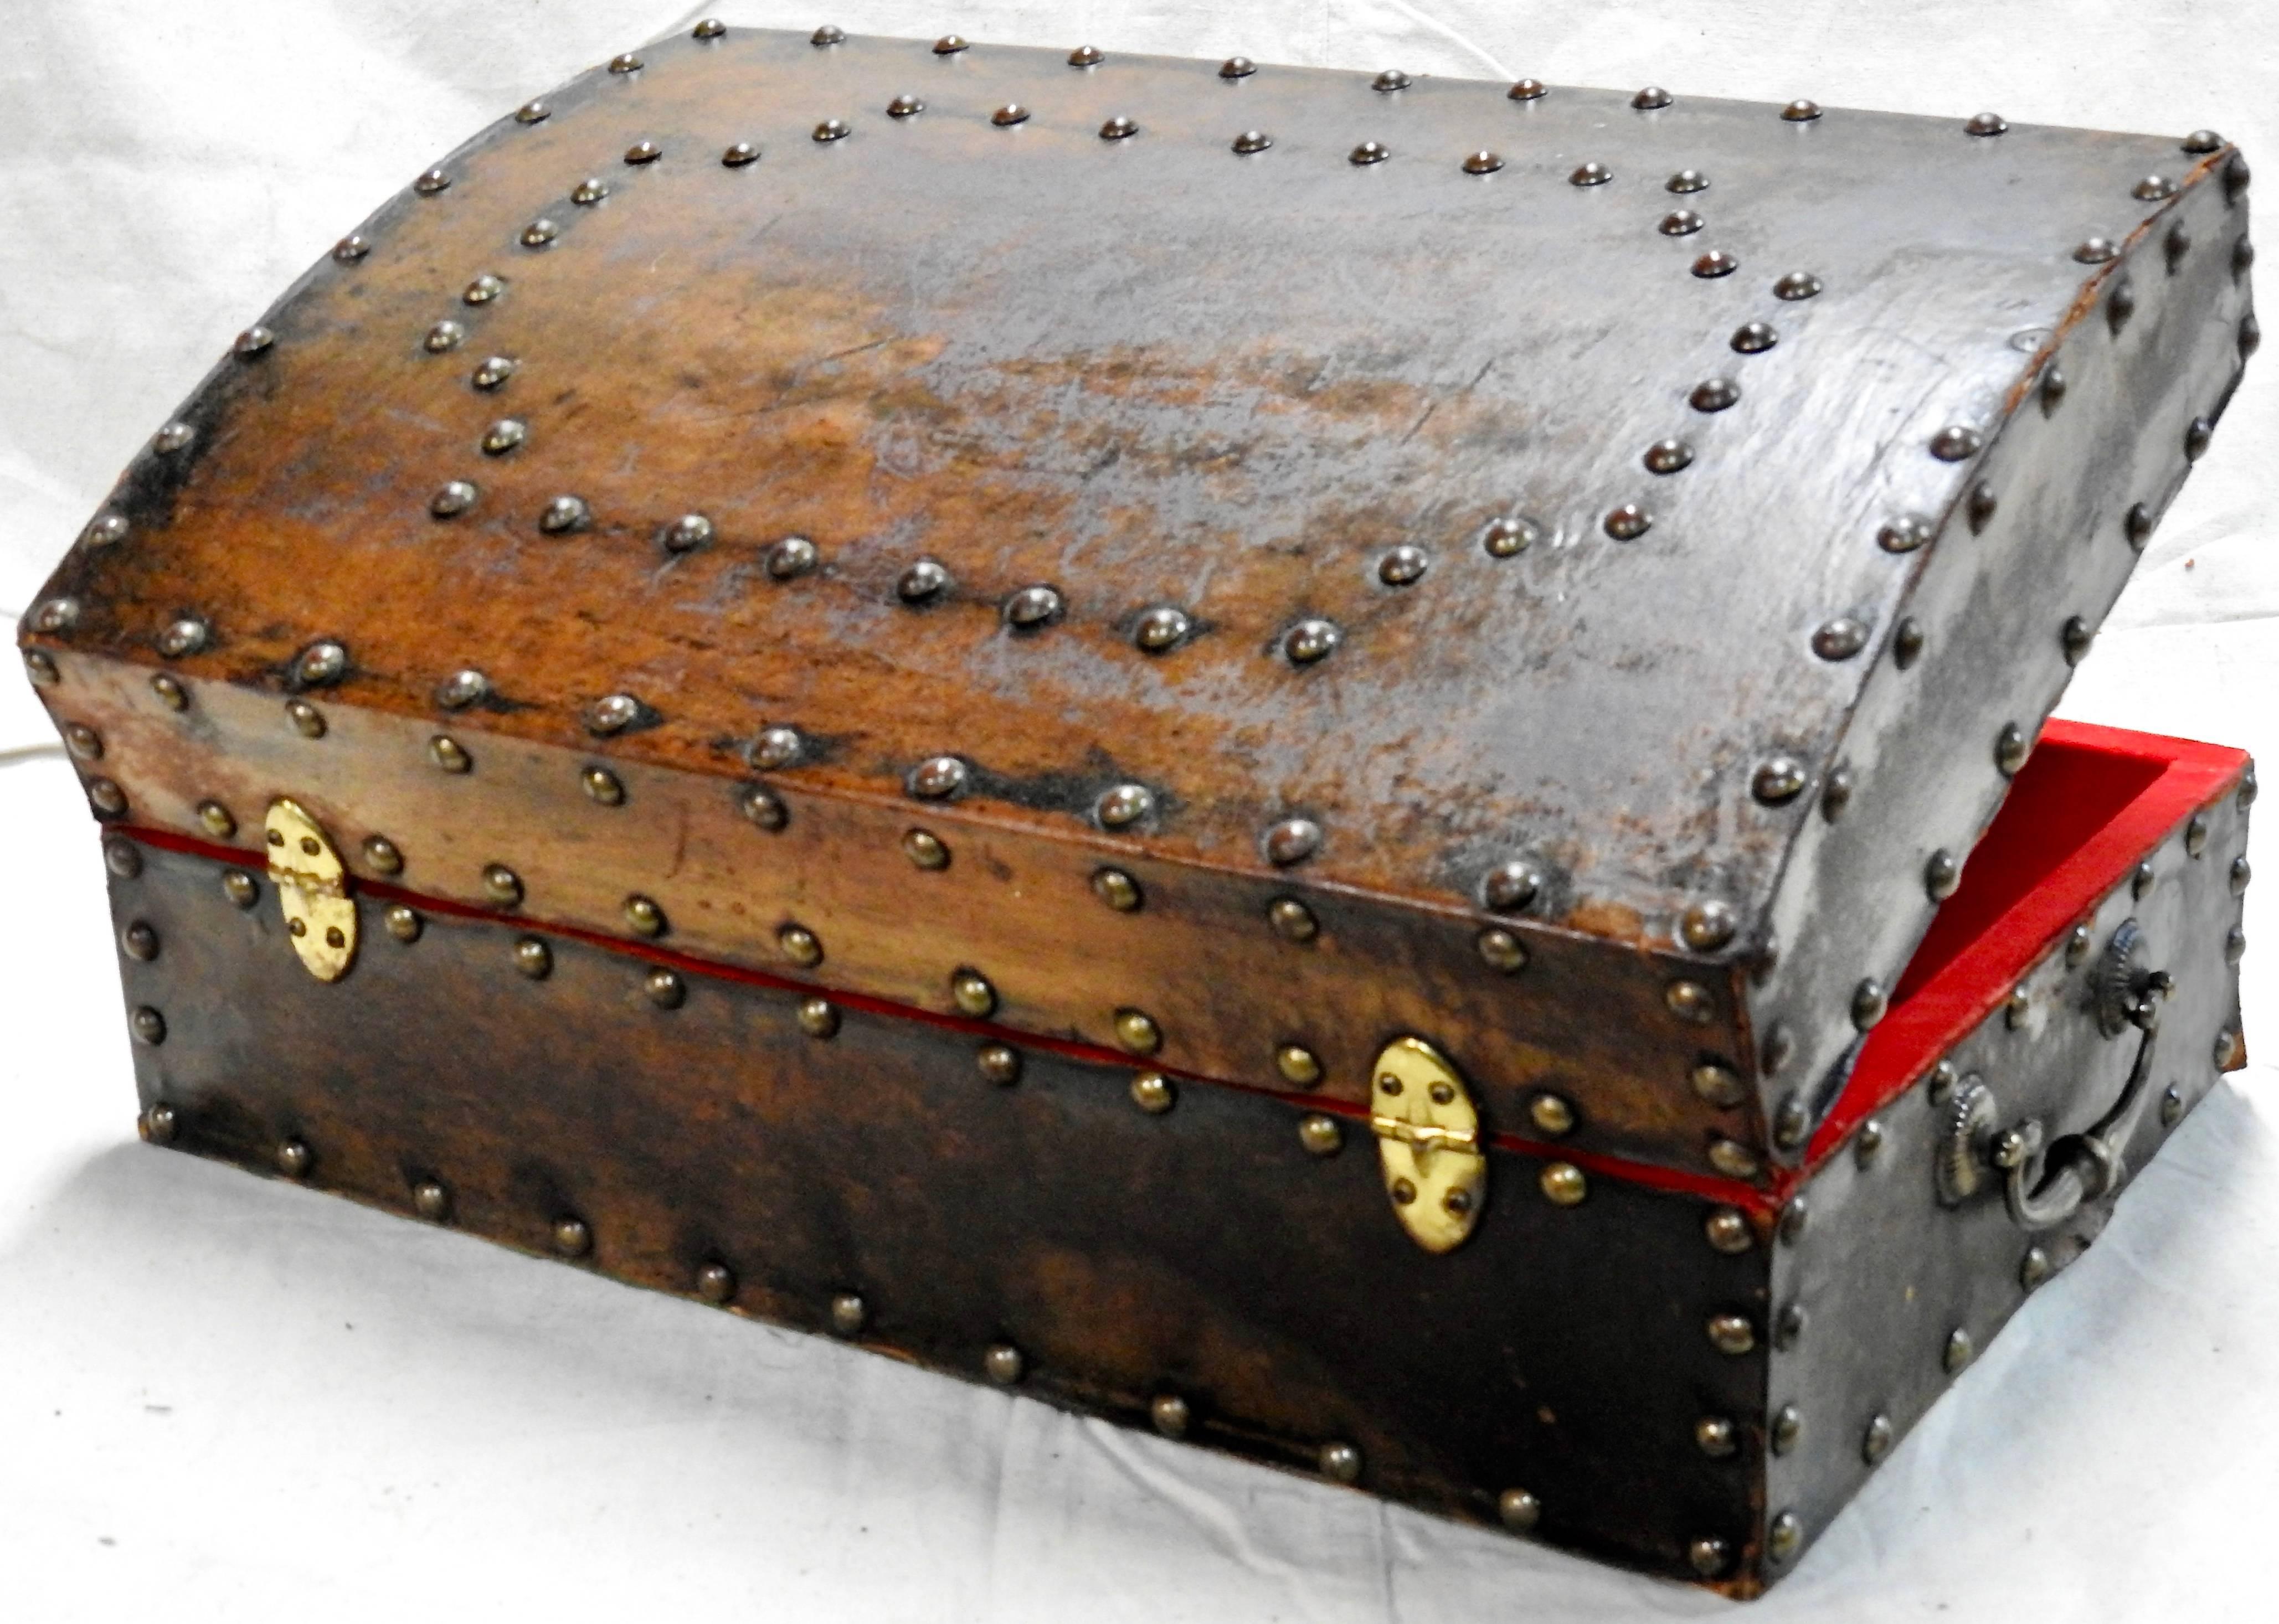 The hammered bronze tacks make a statement on this Classic leather on wood box from the late 1800s. It has a pair of bronze handles for easy lifting. The curved top is enhanced with additional tacks. The red fabric lining the interior is velveteen